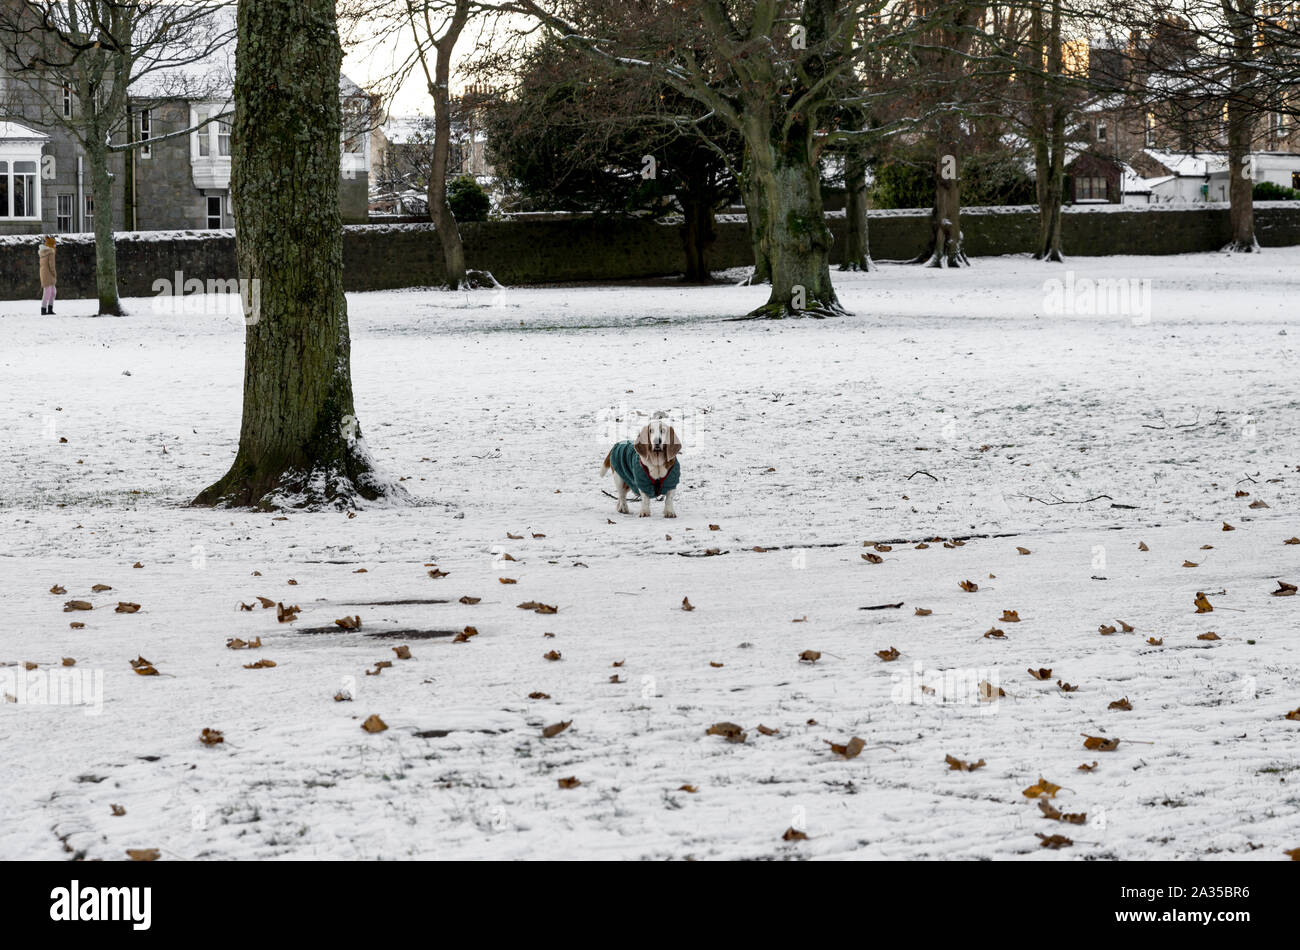 A cute dog dressed in warm clothes and standing on snow covered ground in Victoria park, Aberdeen, Scotland Stock Photo